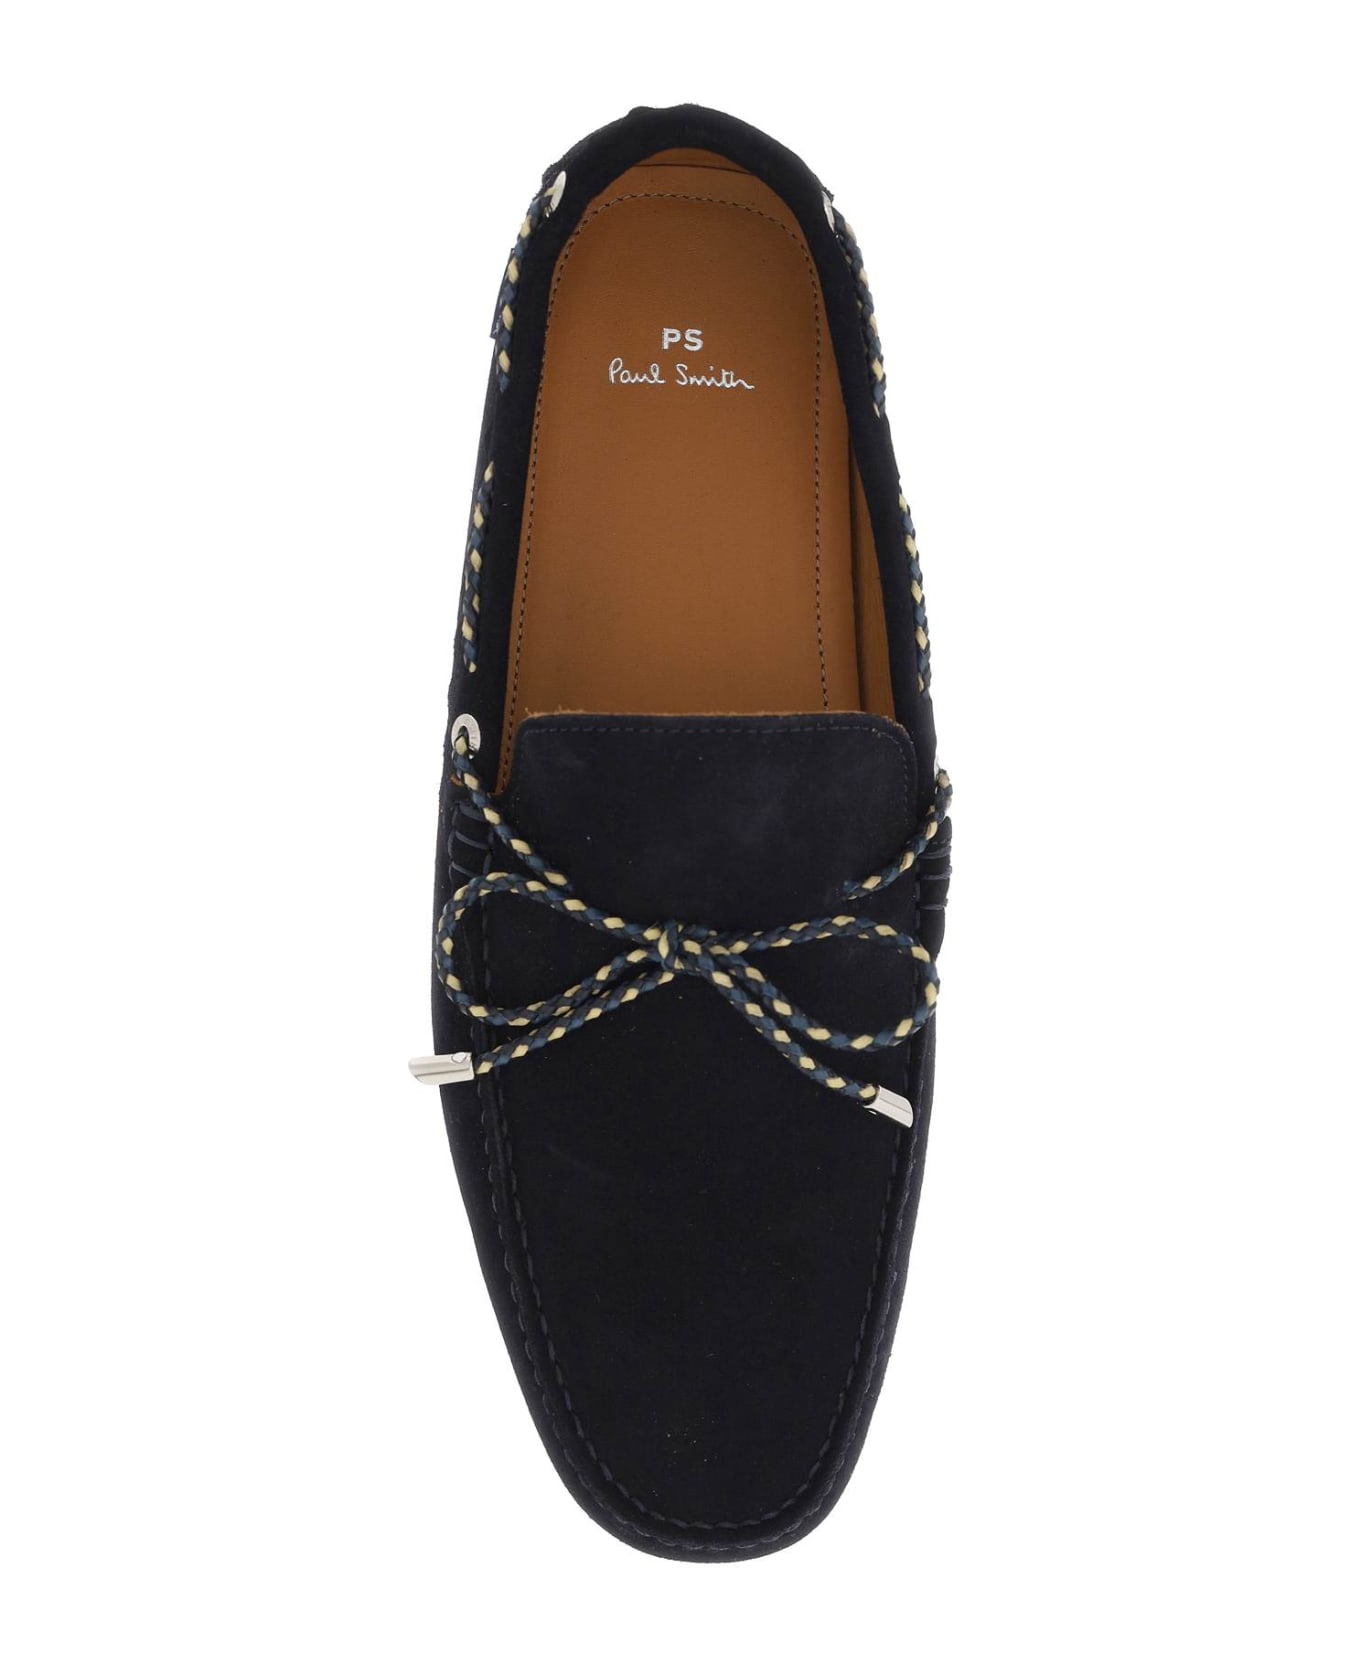 PS by Paul Smith Springfield Suede Loafers - VERY DARK NAVY (Blue) ローファー＆デッキシューズ